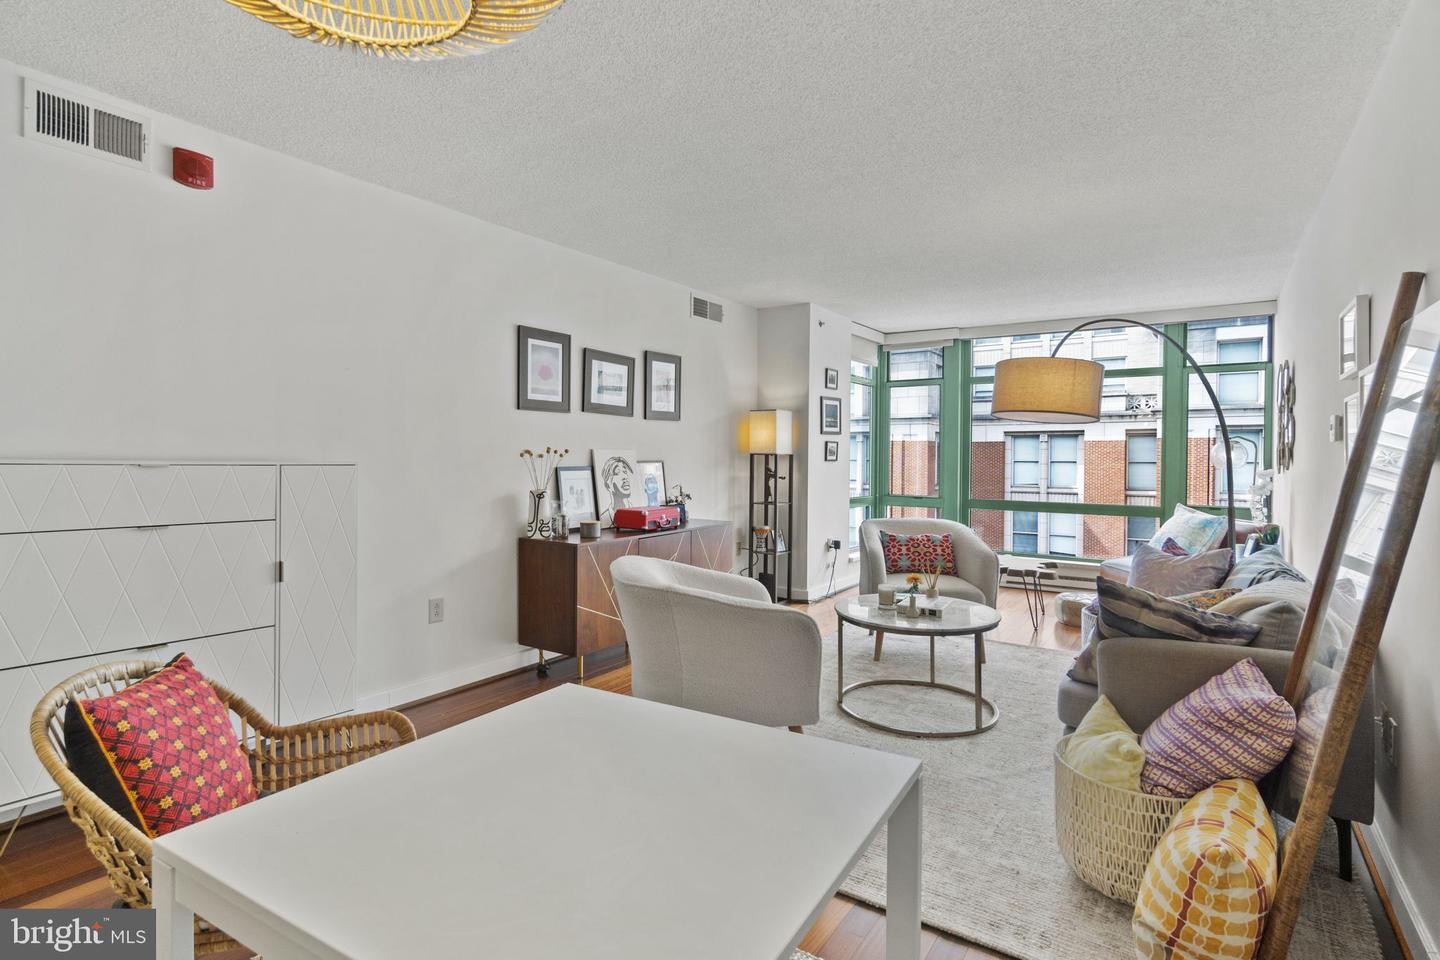 6. 1150 K St NW 